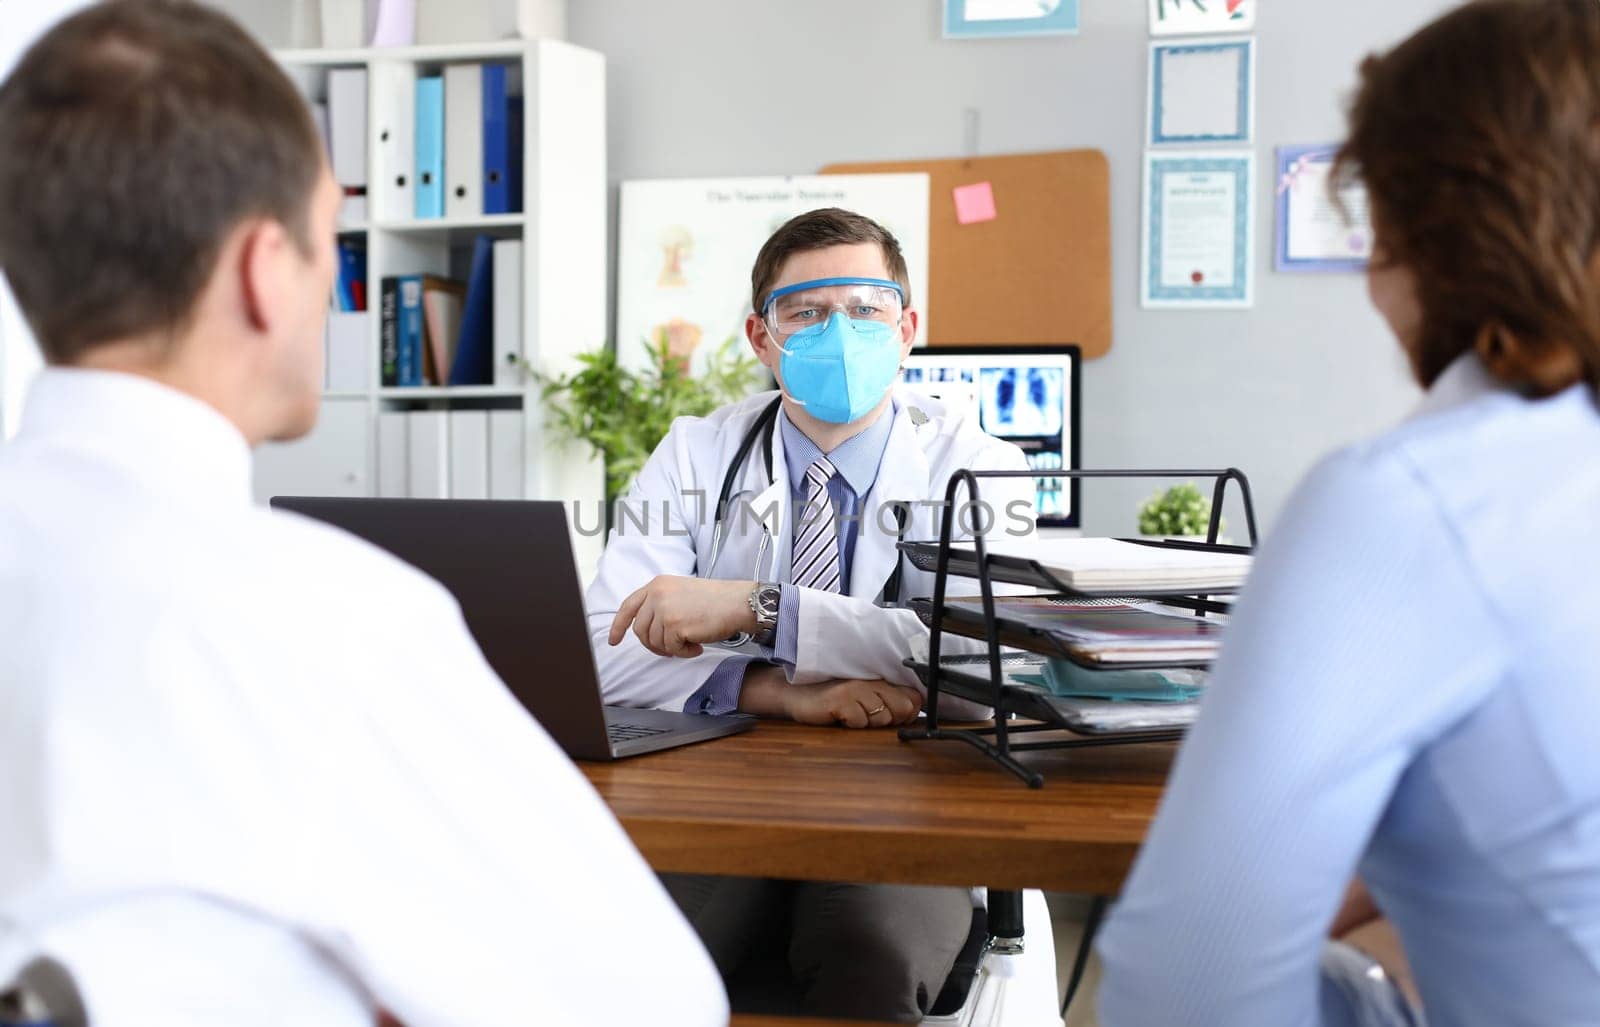 Doctor receives patients in protective medical mask. Doctors safety in coronavirus pandemic concept